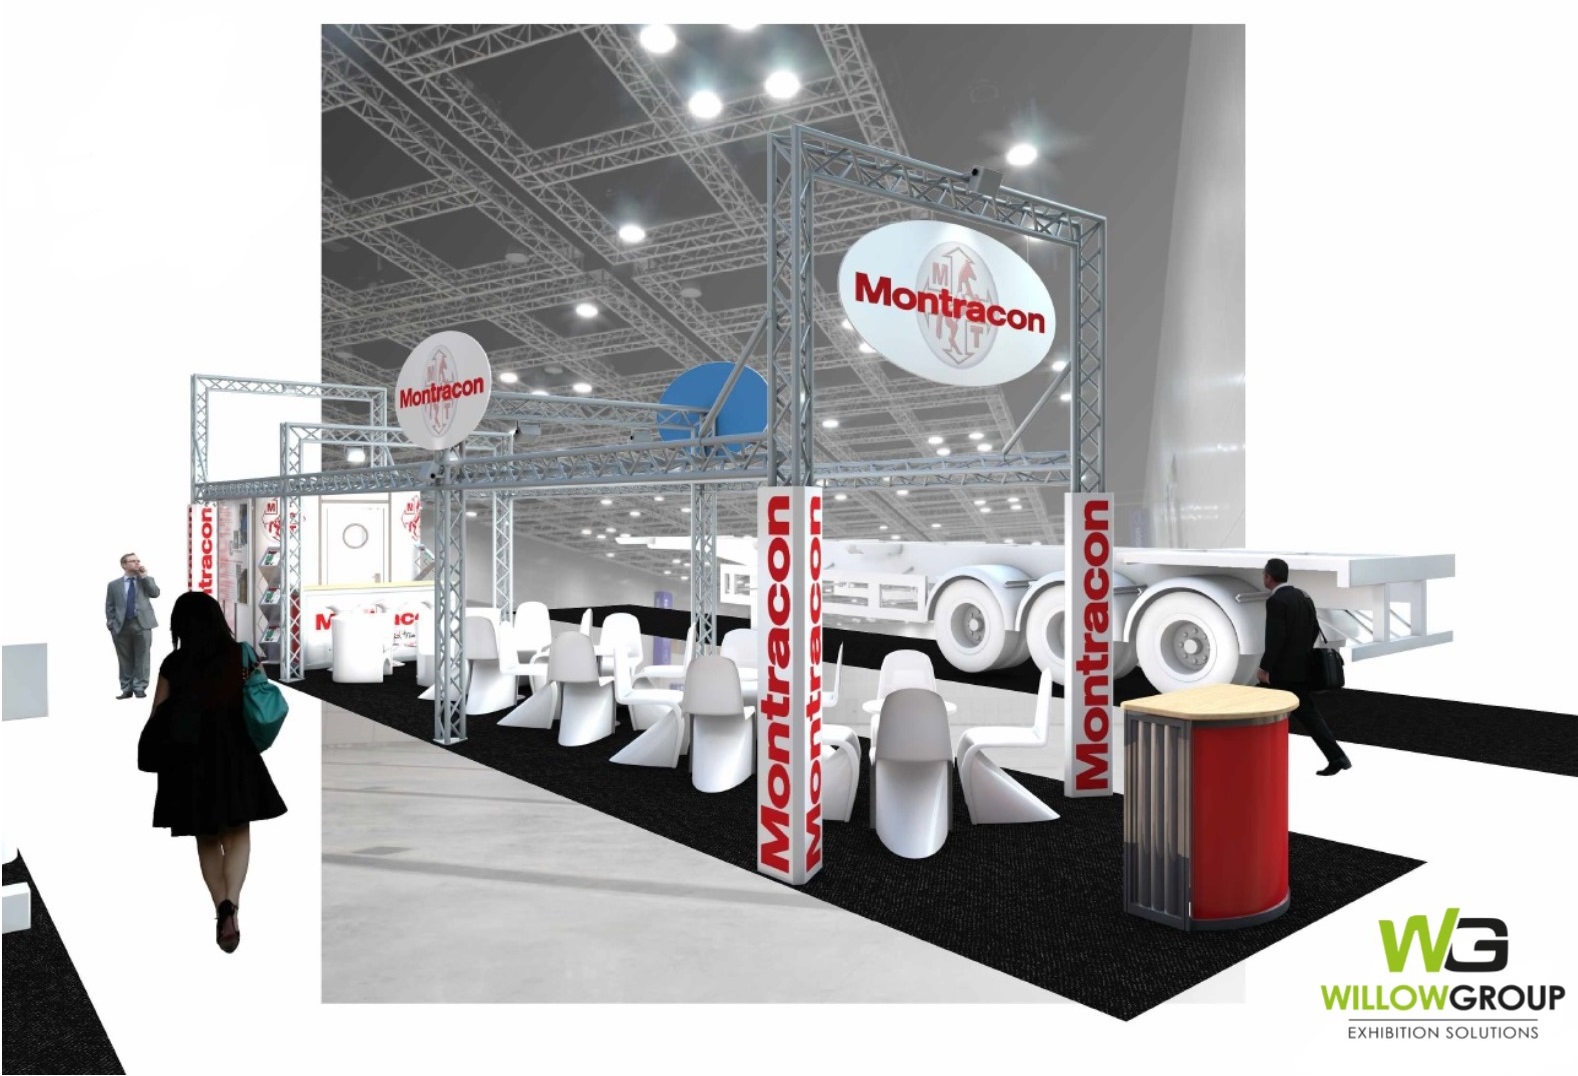 Montracon exhibition stand visual mockup